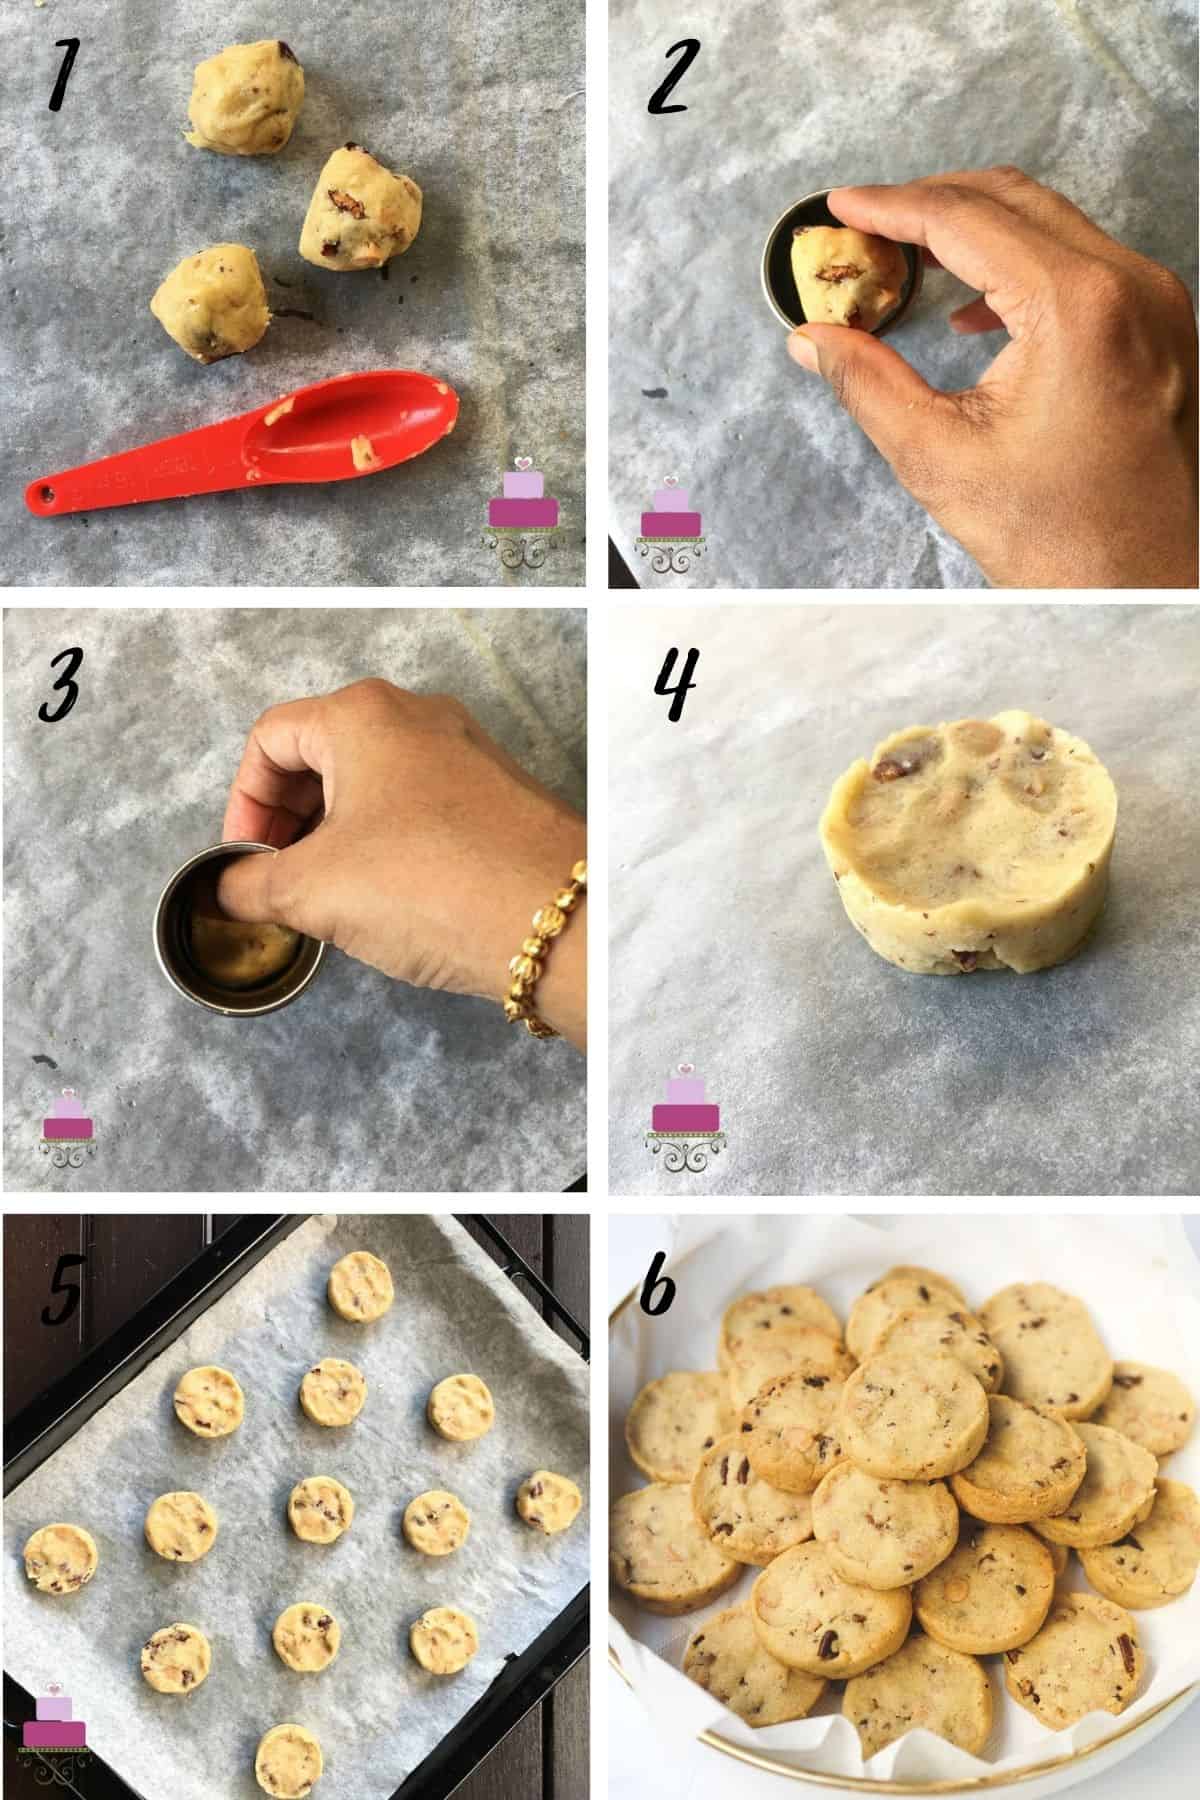 A poster of 6 images showing how to shape cookies with a round cutter.